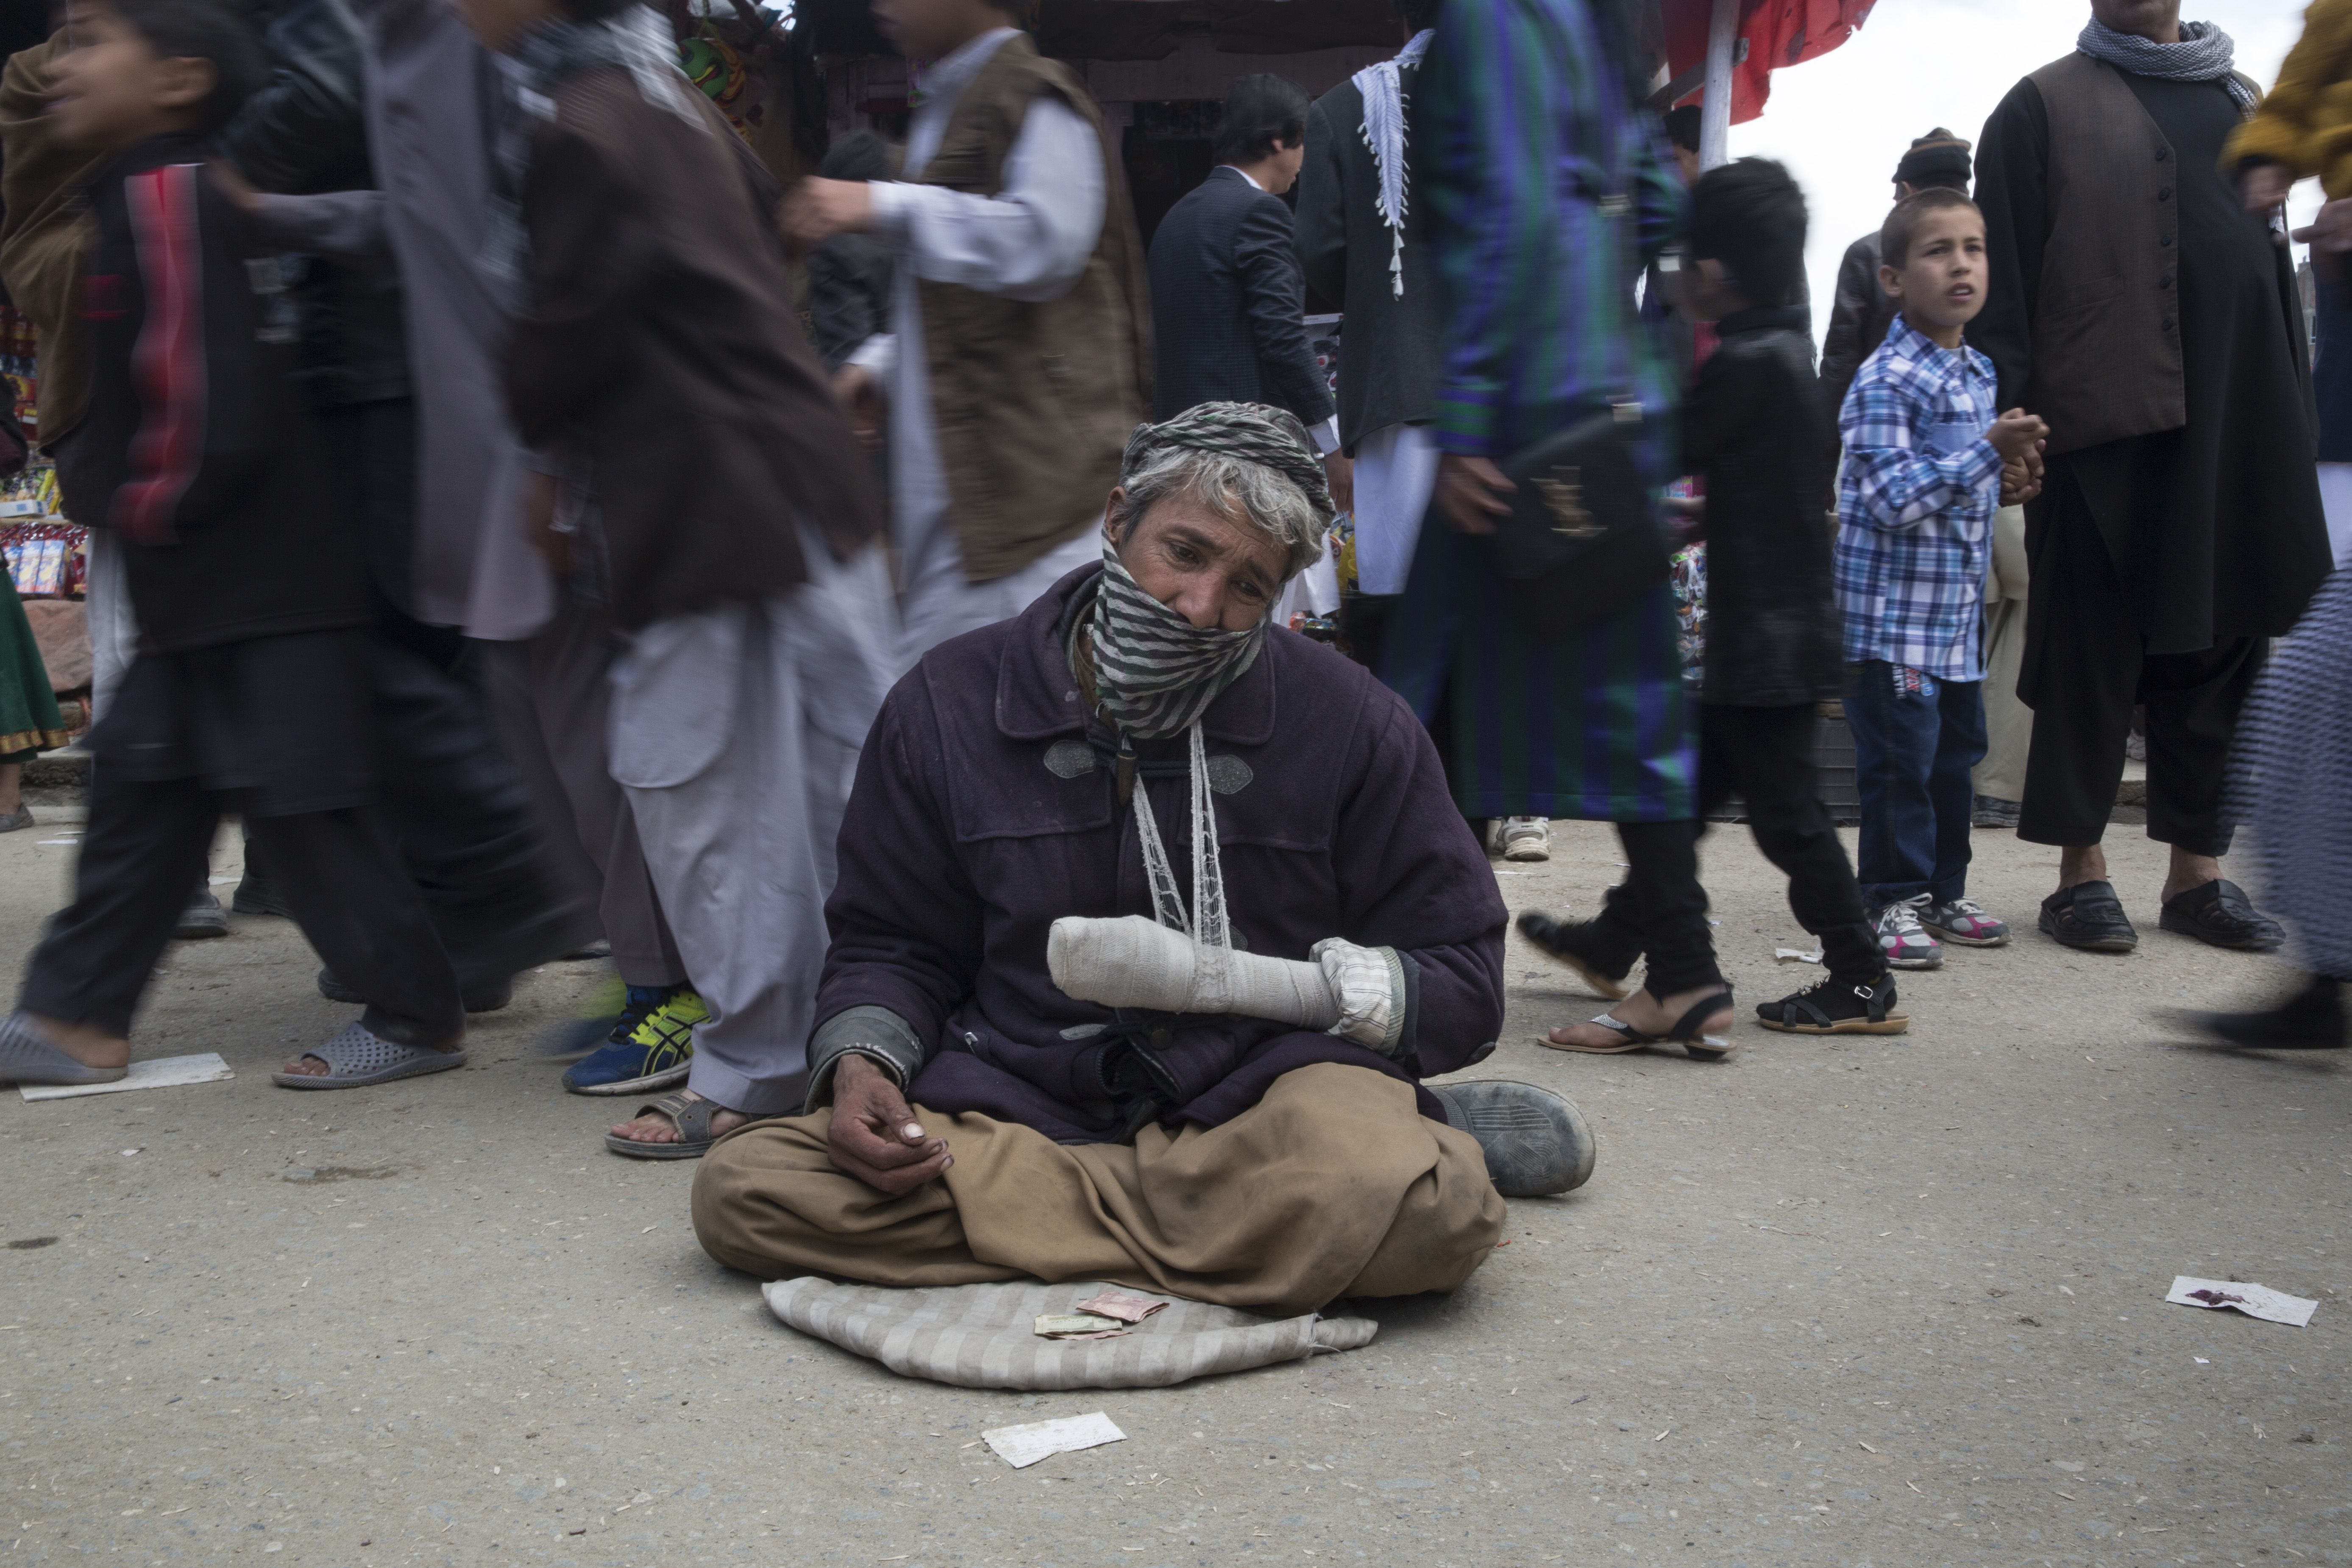 Ibrahim, a mine victim, begs on the street during Nowruz, the Afghan New Year Festival. Image by Paula Bronstein. Afghanistan, 2015. 